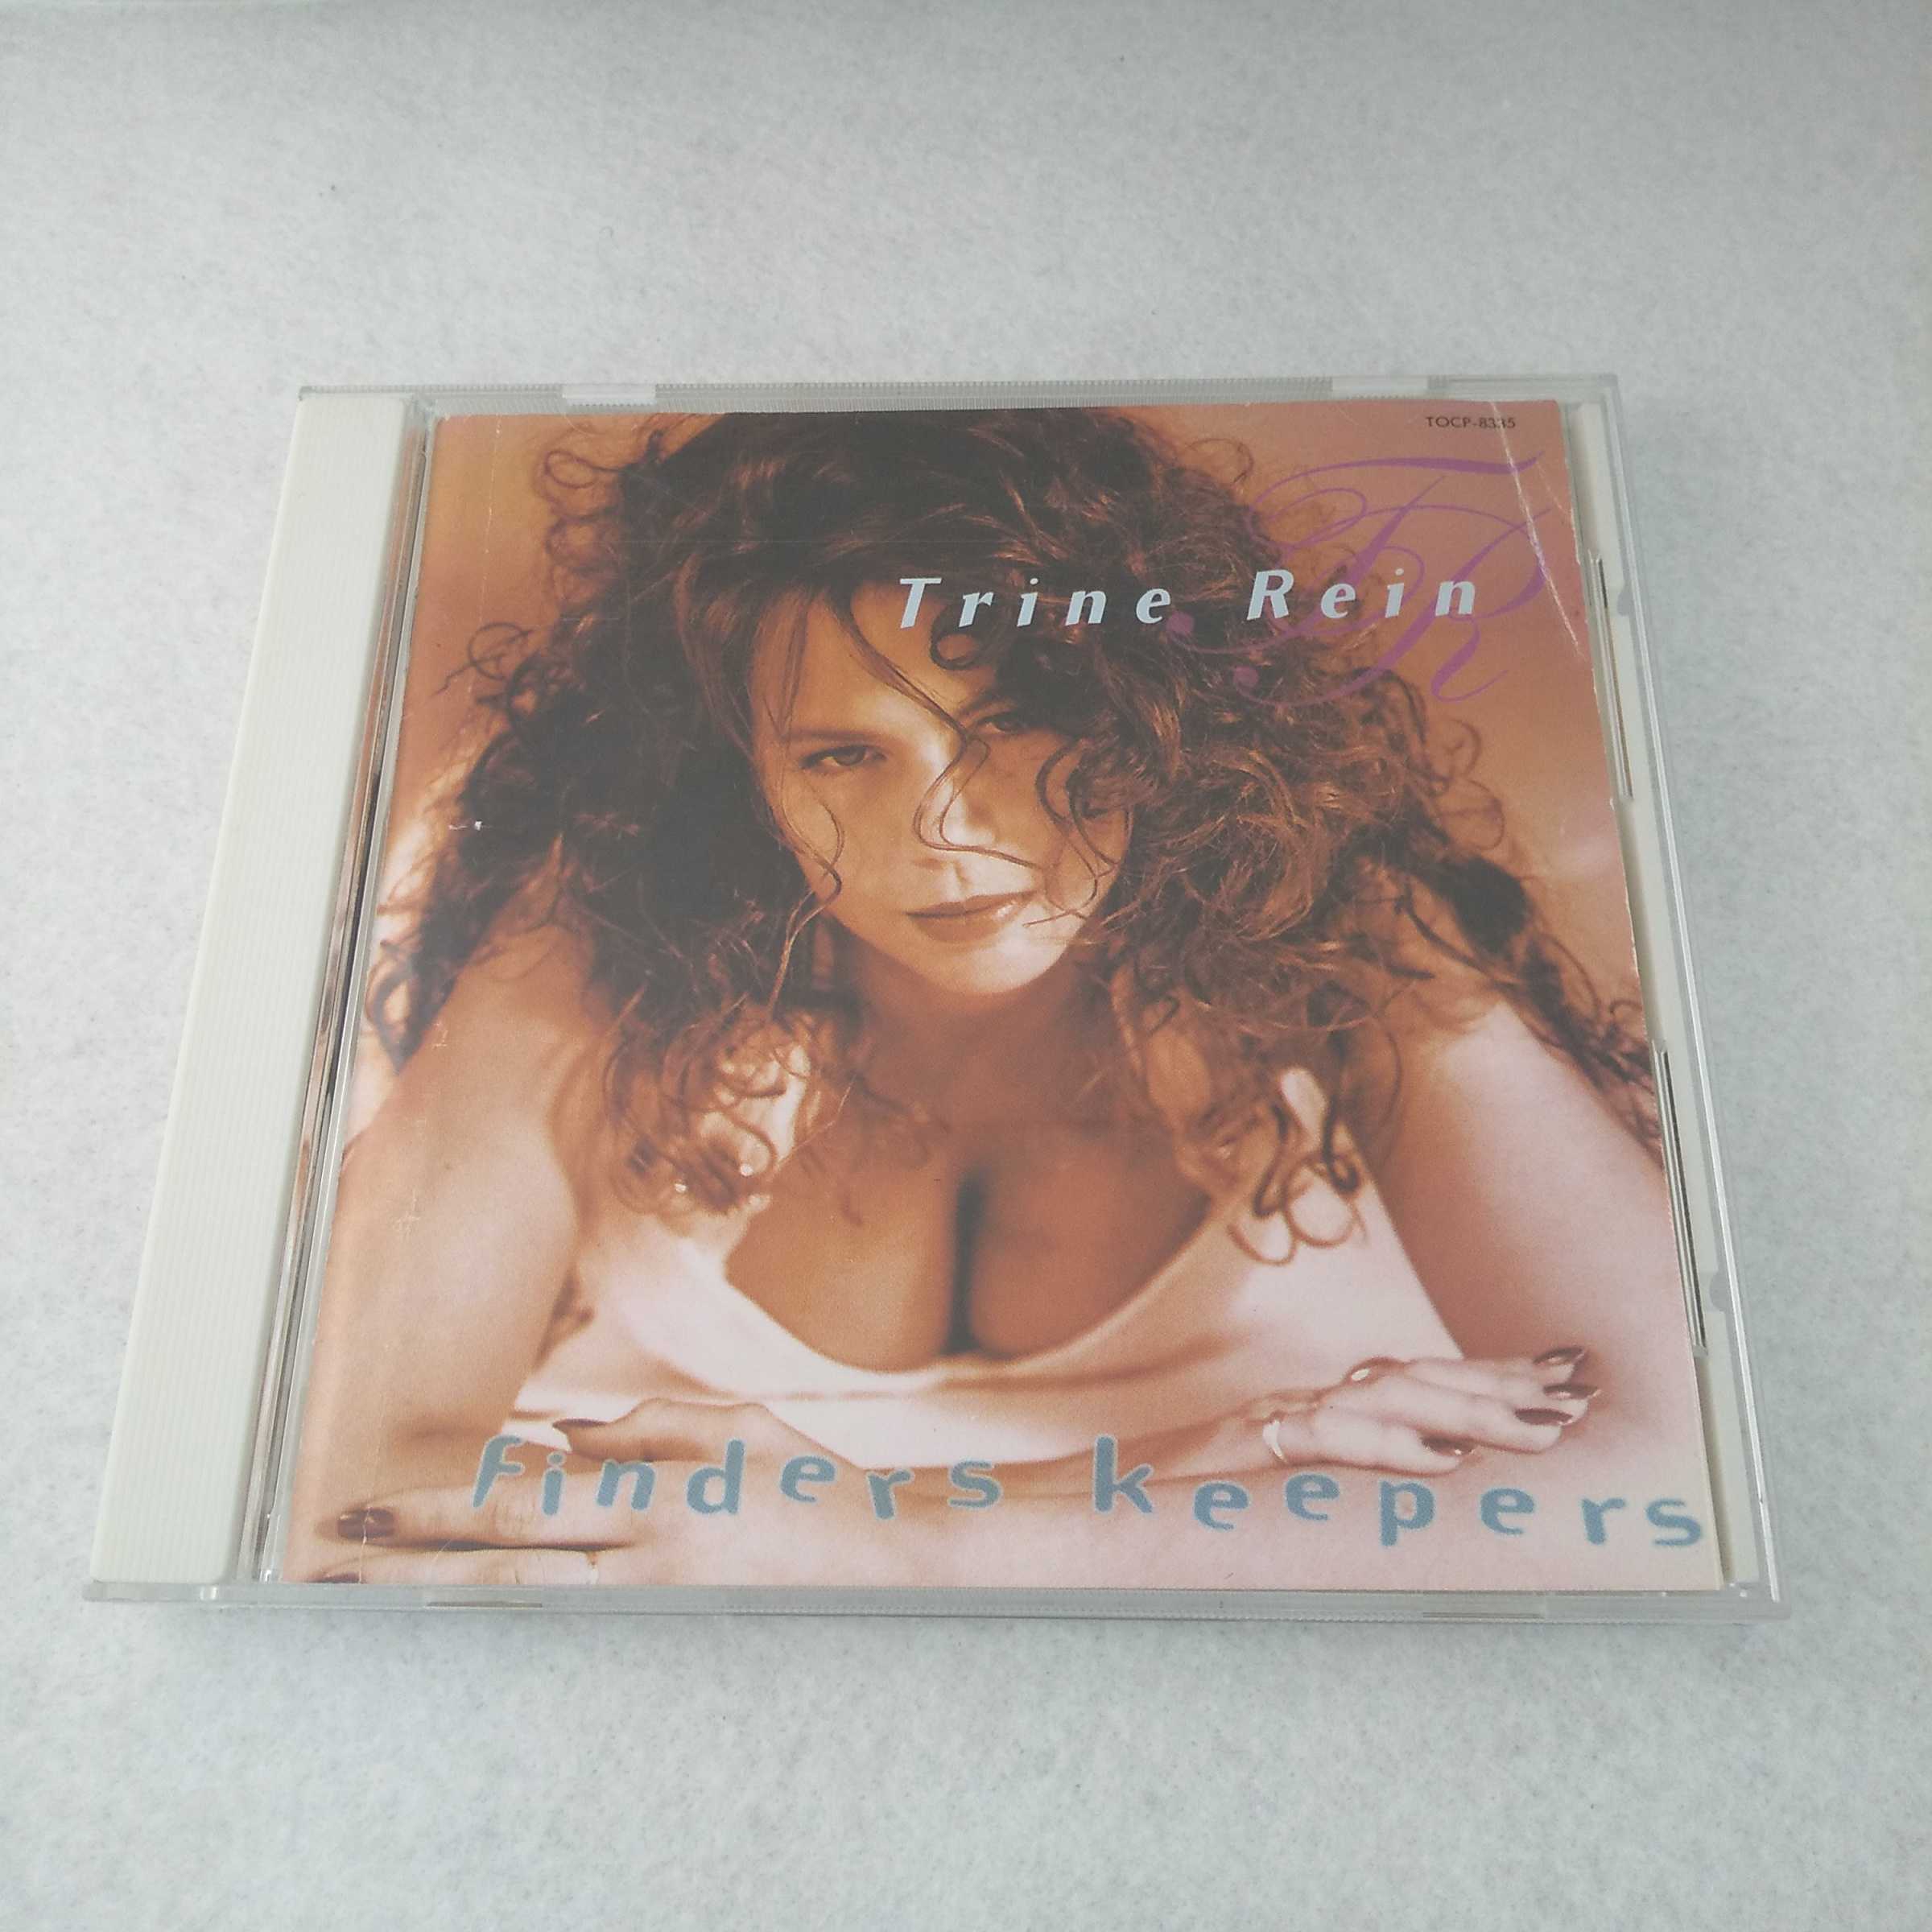 AC10891 【中古】 【CD】 FINDERS KEEPERS/トリーネ レイン